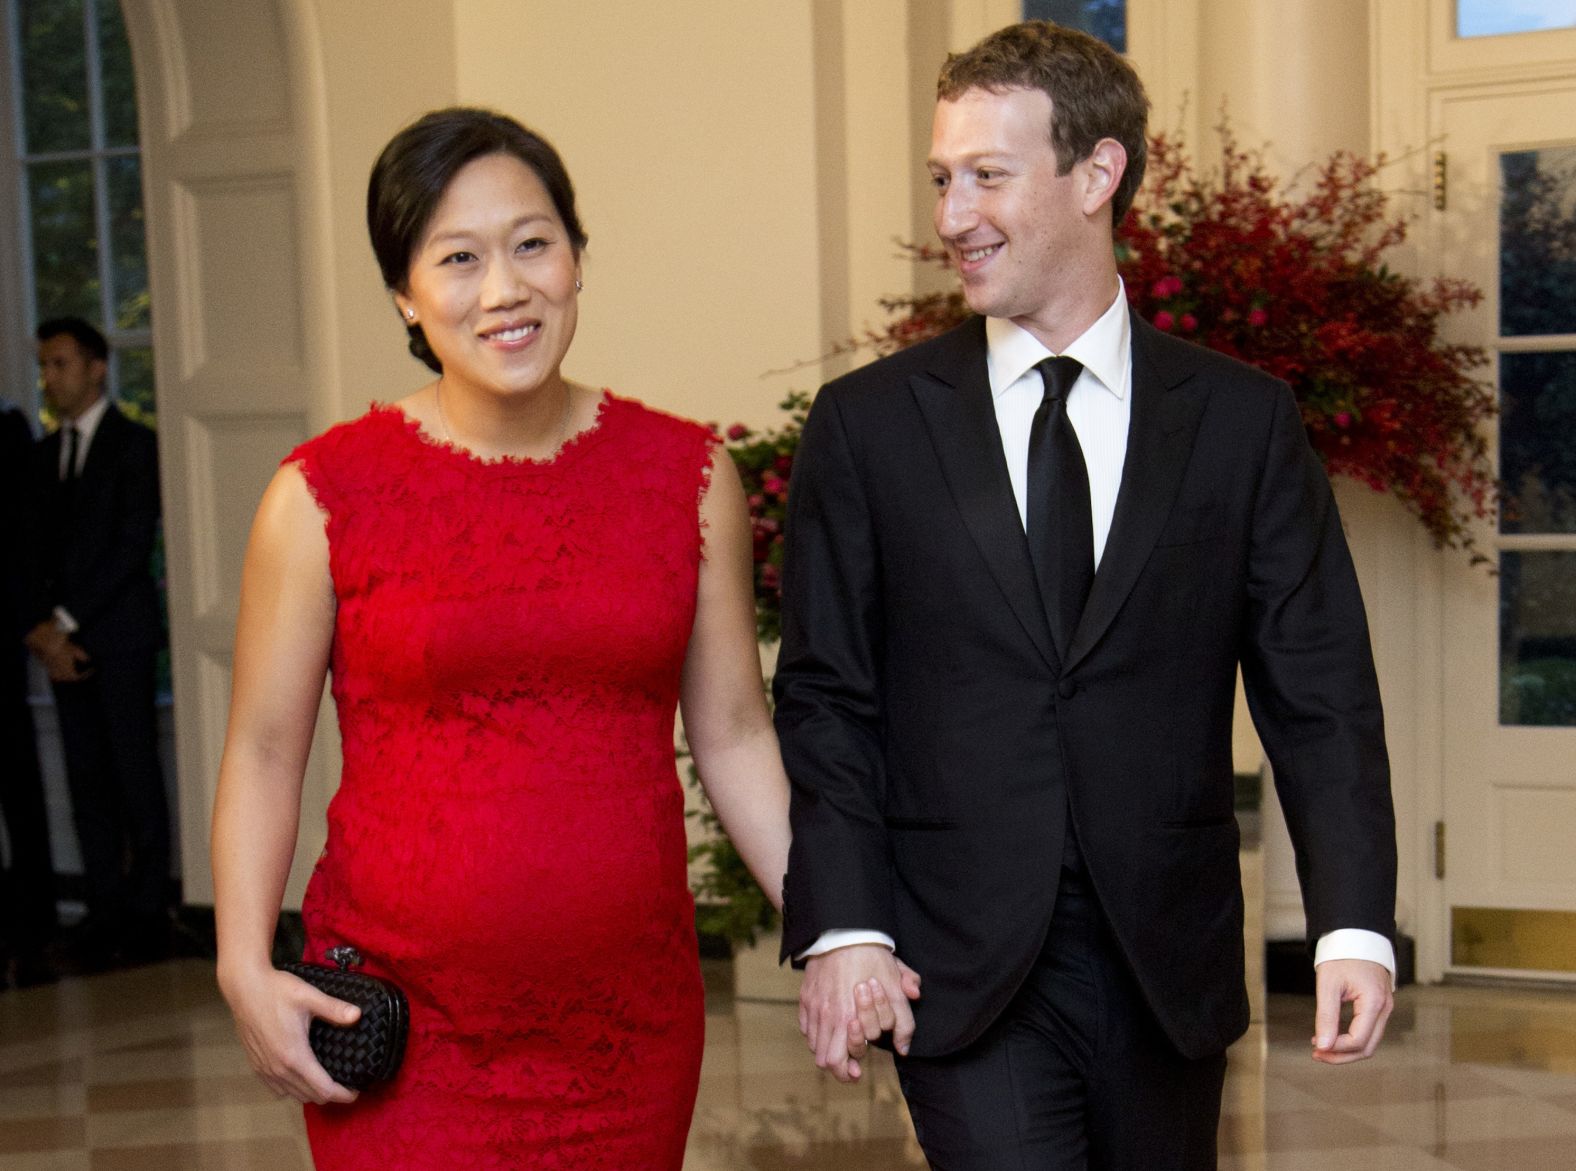 Zuckerberg and his wife, Priscilla Chan, arrive for a state dinner at the White House that was held in honor of Chinese leader Xi Jinping in 2015. Zuckerberg married Chan, his Harvard sweetheart, in 2012, and the couple have three children together.